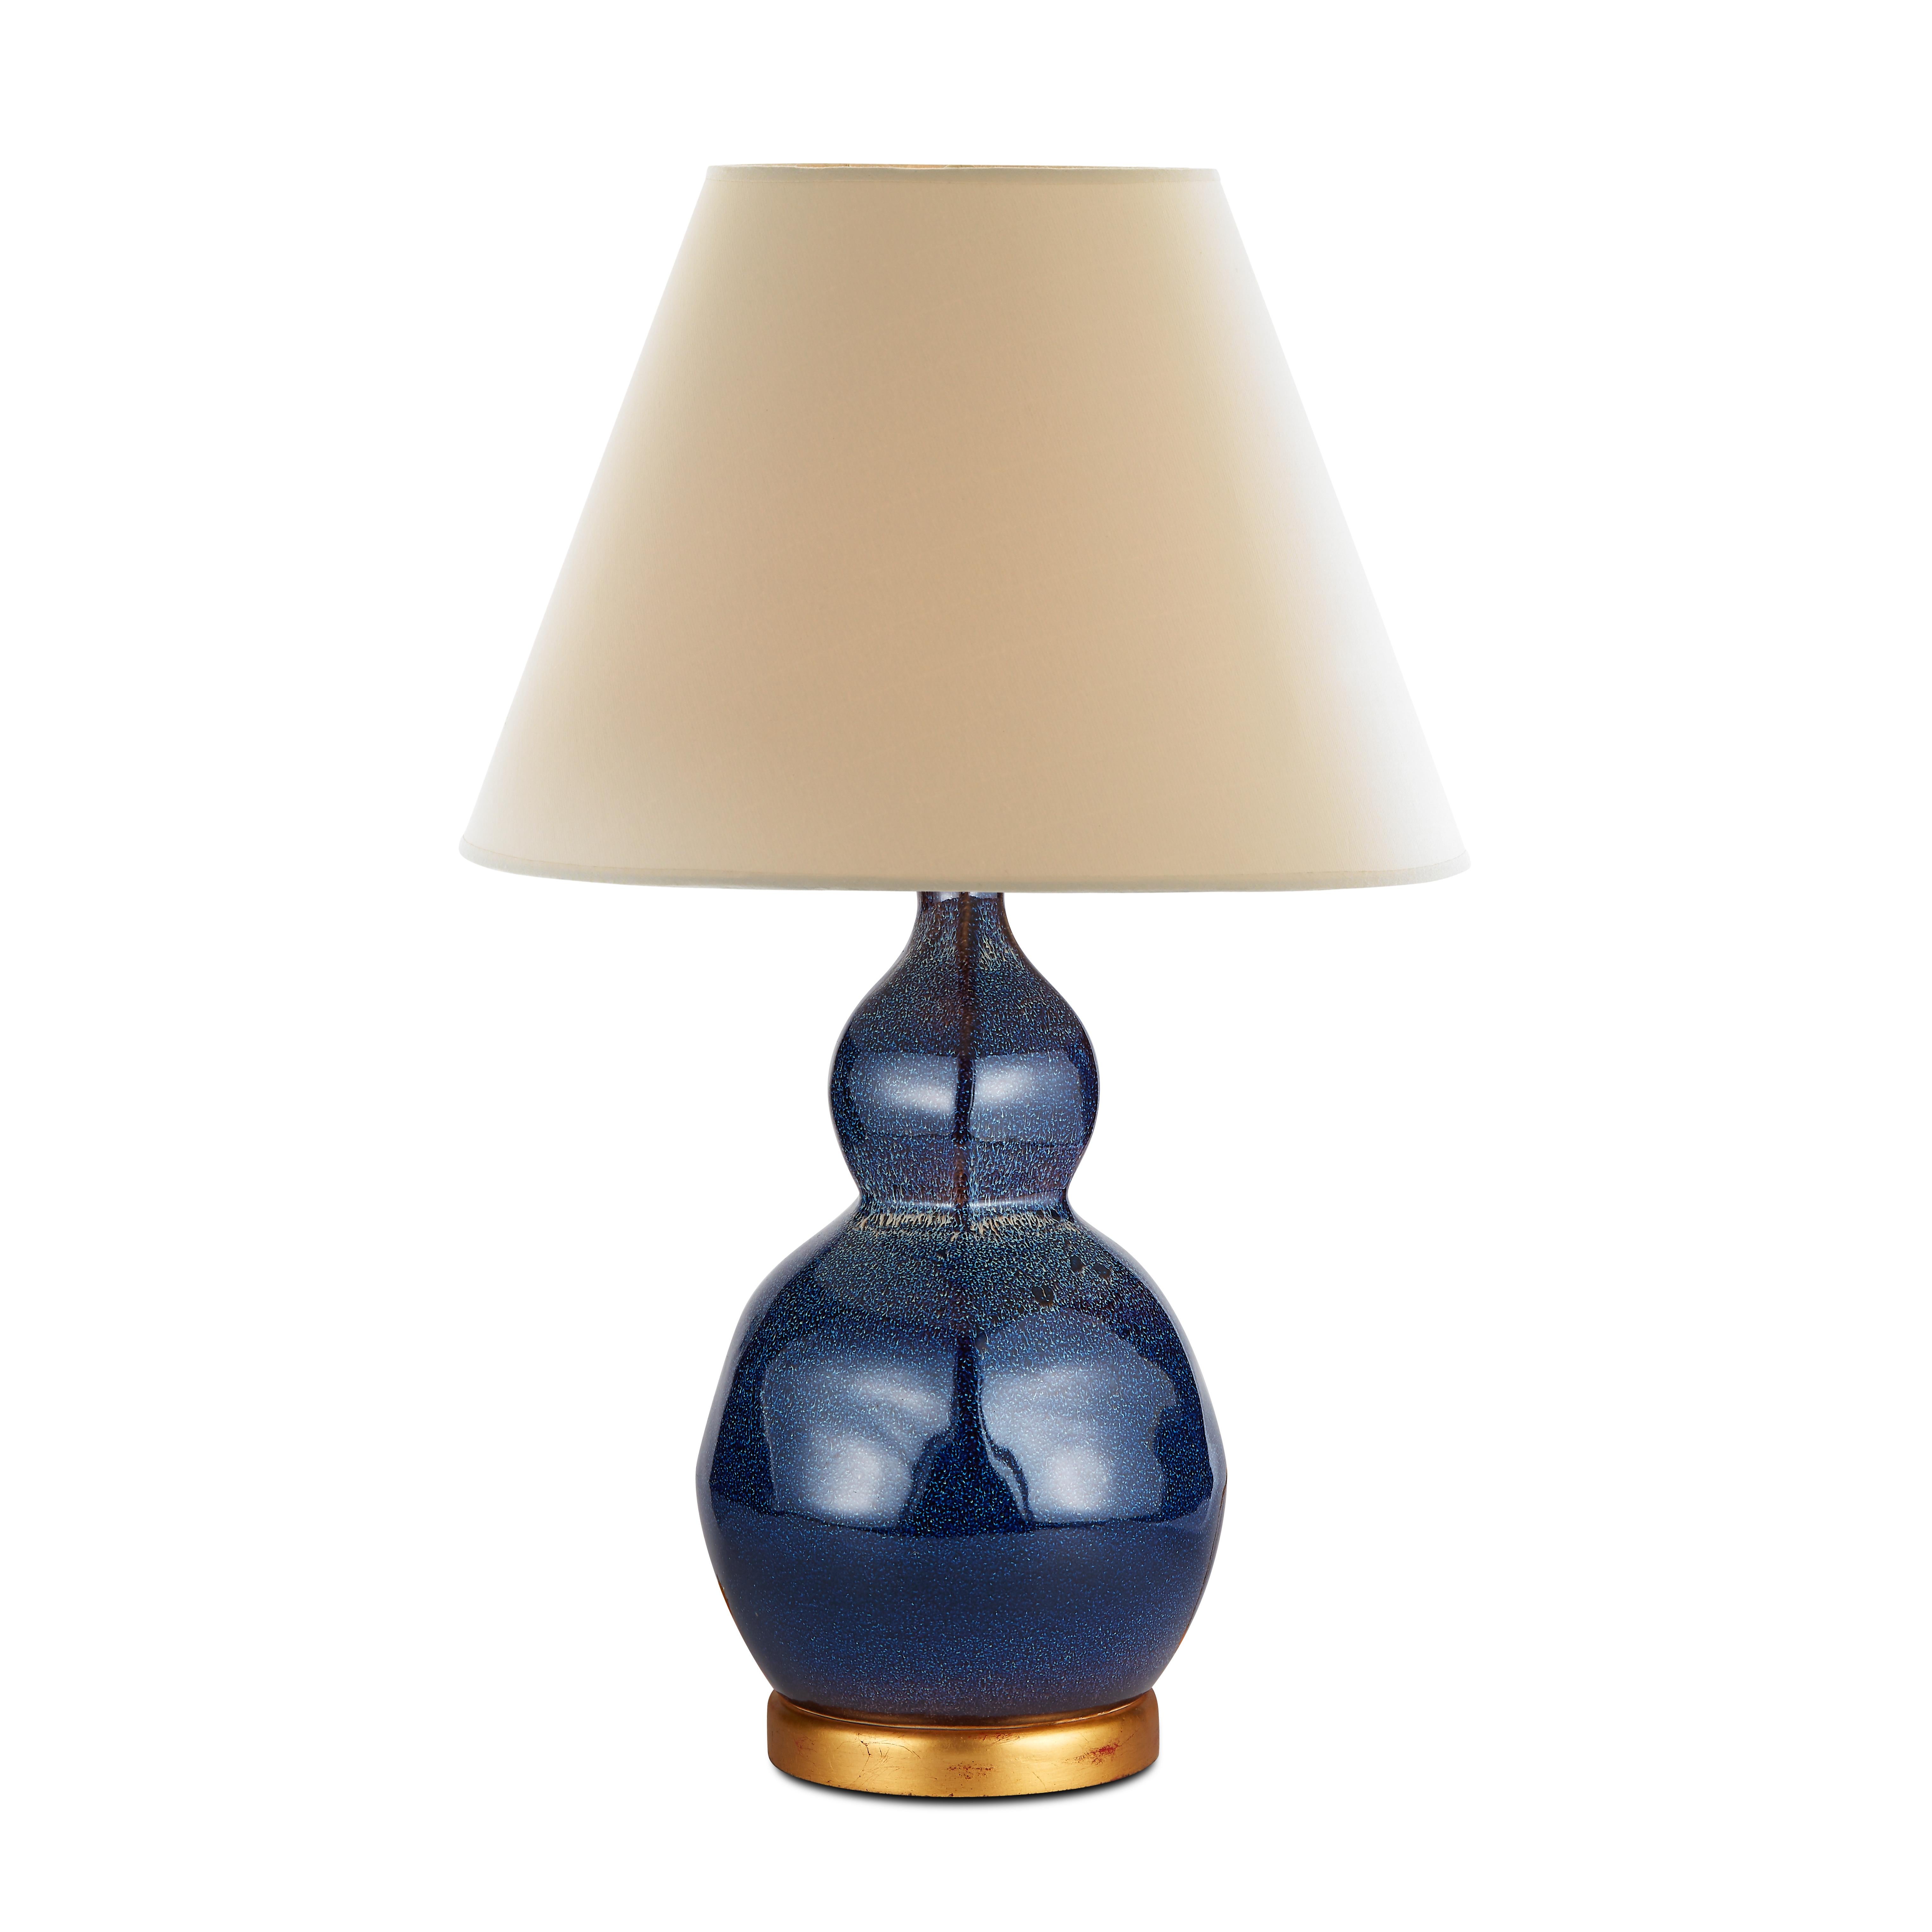 The influence of traditional Jun ware can be seen in the midnight blue glaze of our Small Speckled Lamp. Dotted with small white spots, a thick blue glaze smoothly covers the lamp’s gently faceted double-ground shape, which sits atop a smooth gold